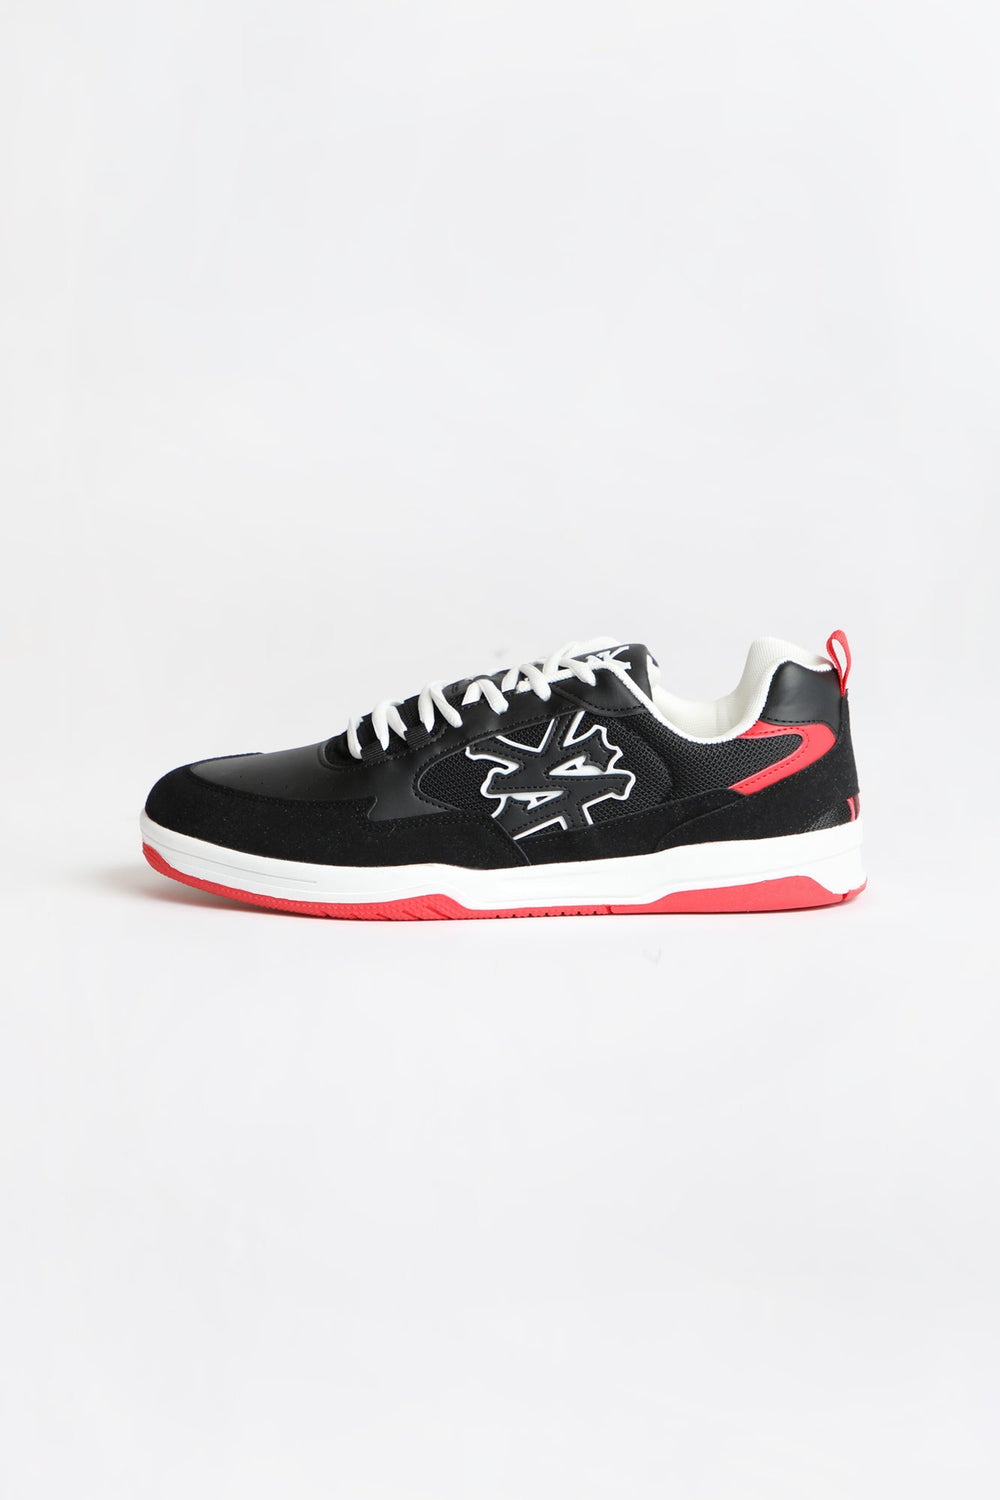 Zoo York Youth Athletic Shoes Zoo York Youth Athletic Shoes